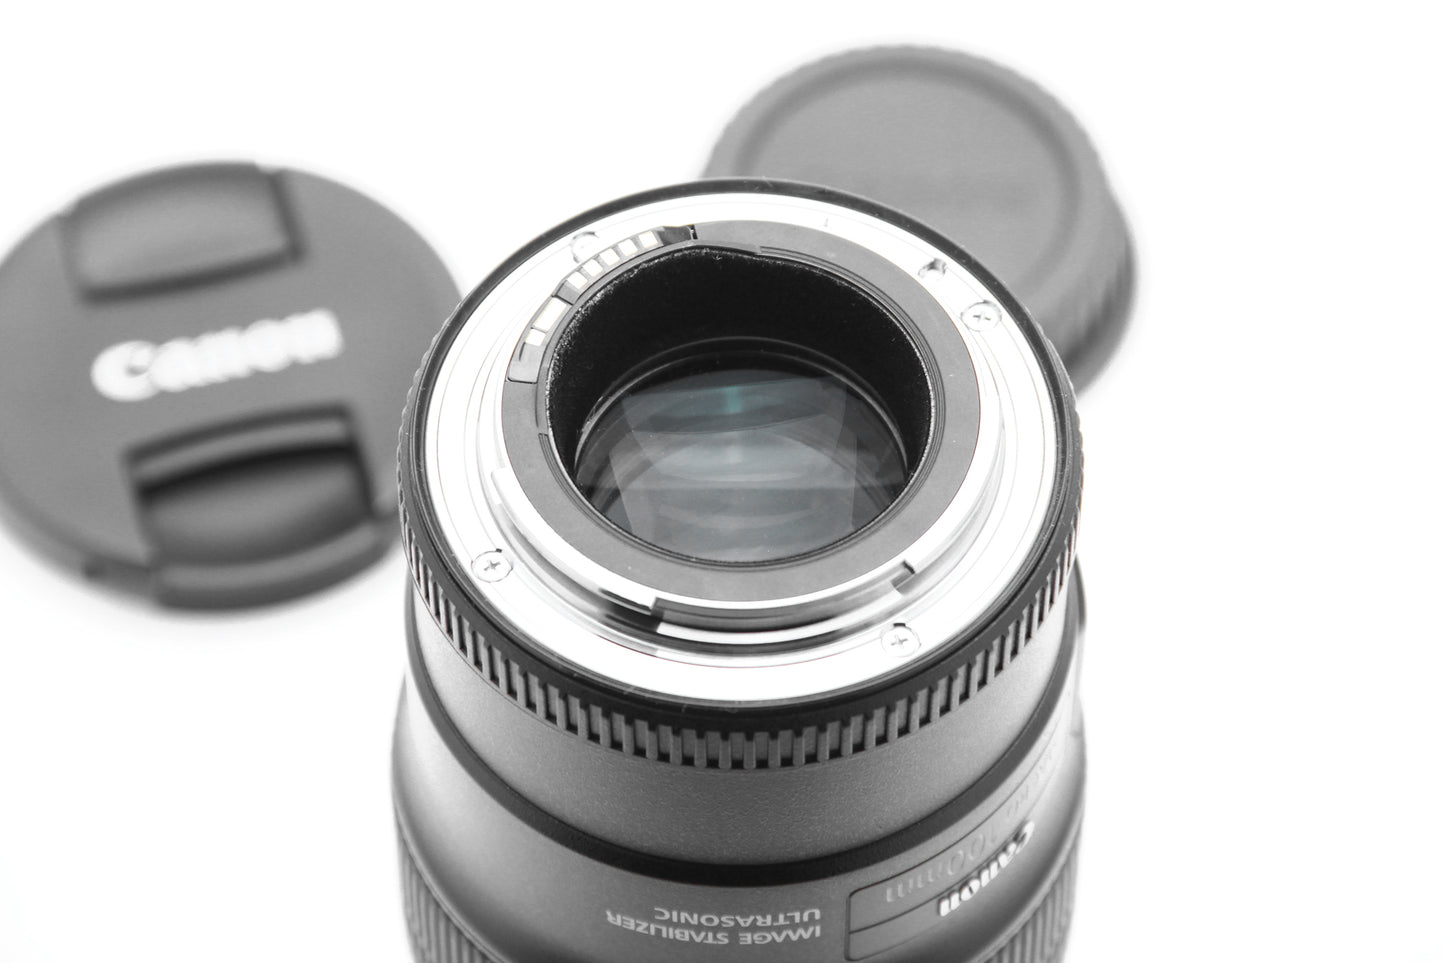 Used Canon 100mm USM IS  F/2.8 L Macro Lens